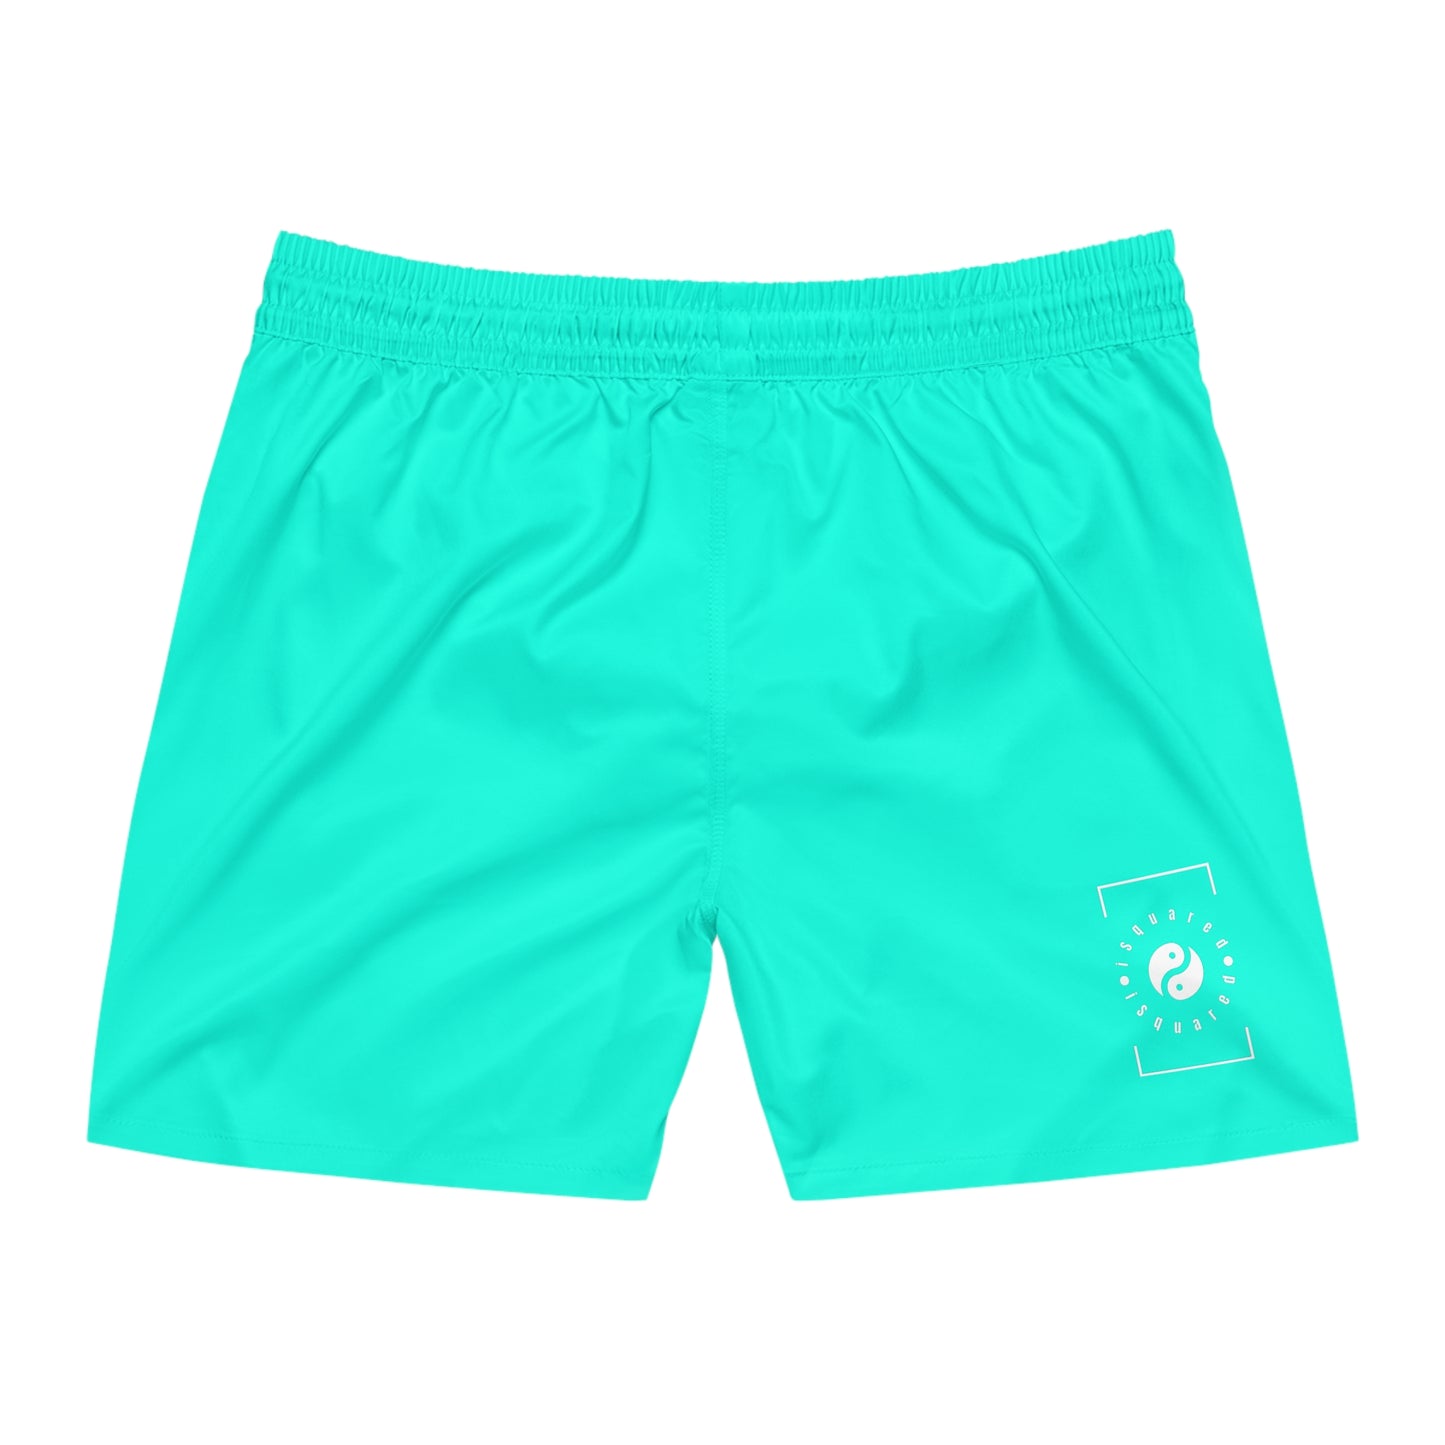 Neon Teal #11ffe3 - Swim Shorts (Solid Color) for Men